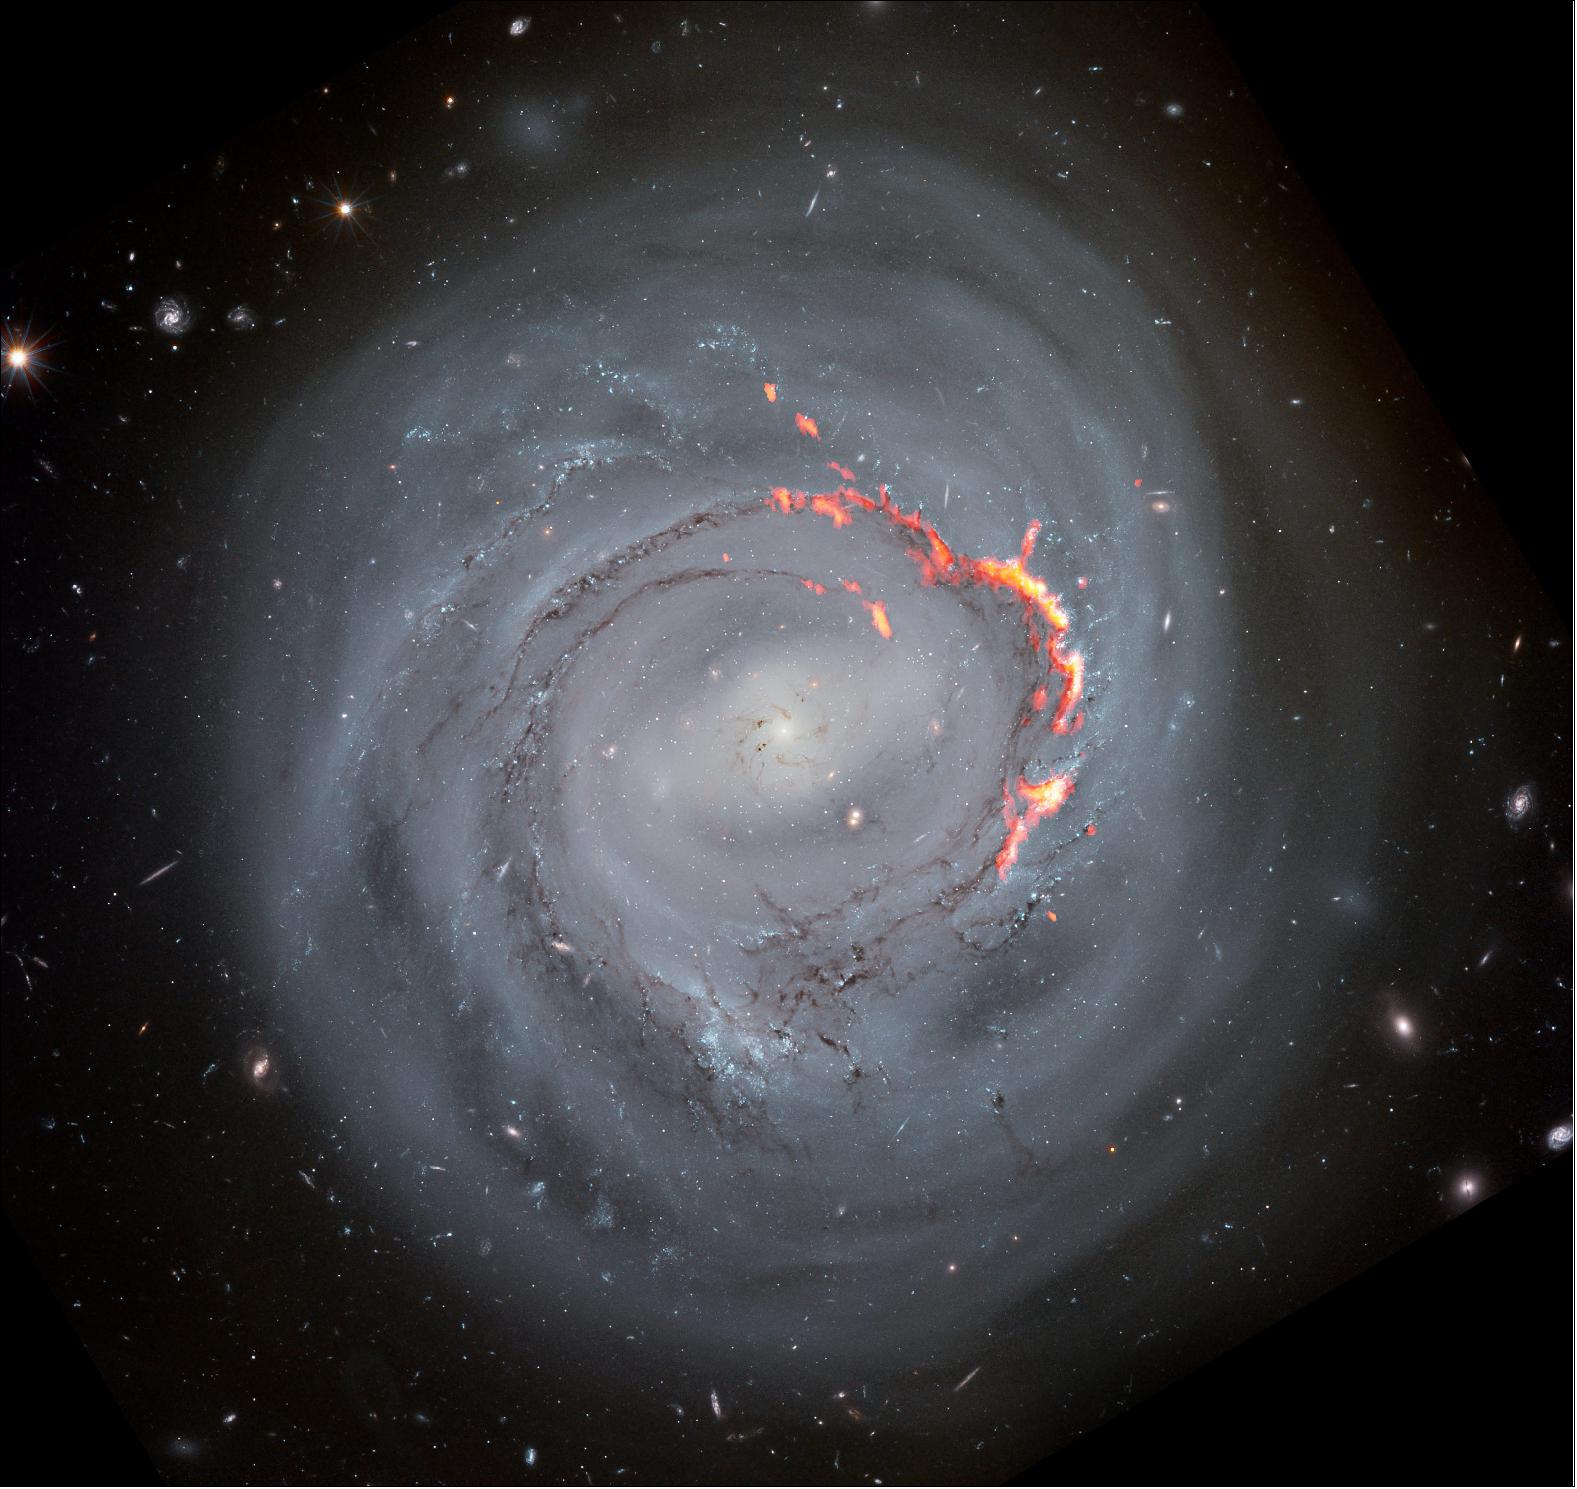 Figure 33: Shown here in composite view, ALMA data (red/orange) reveals filament structures left behind by ram pressure stripping in a Hubble Space Telescope optical view of NGC4921. Scientists believe that these filaments are formed as magnetic fields in the galaxy prevent some matter from being stripped away [image credit: ALMA (ESO/NAOJ/NRAO)/S. Dagnello (NRAO), NASA/ESA/Hubble/K. Cook (LLNL), L. Shatz]